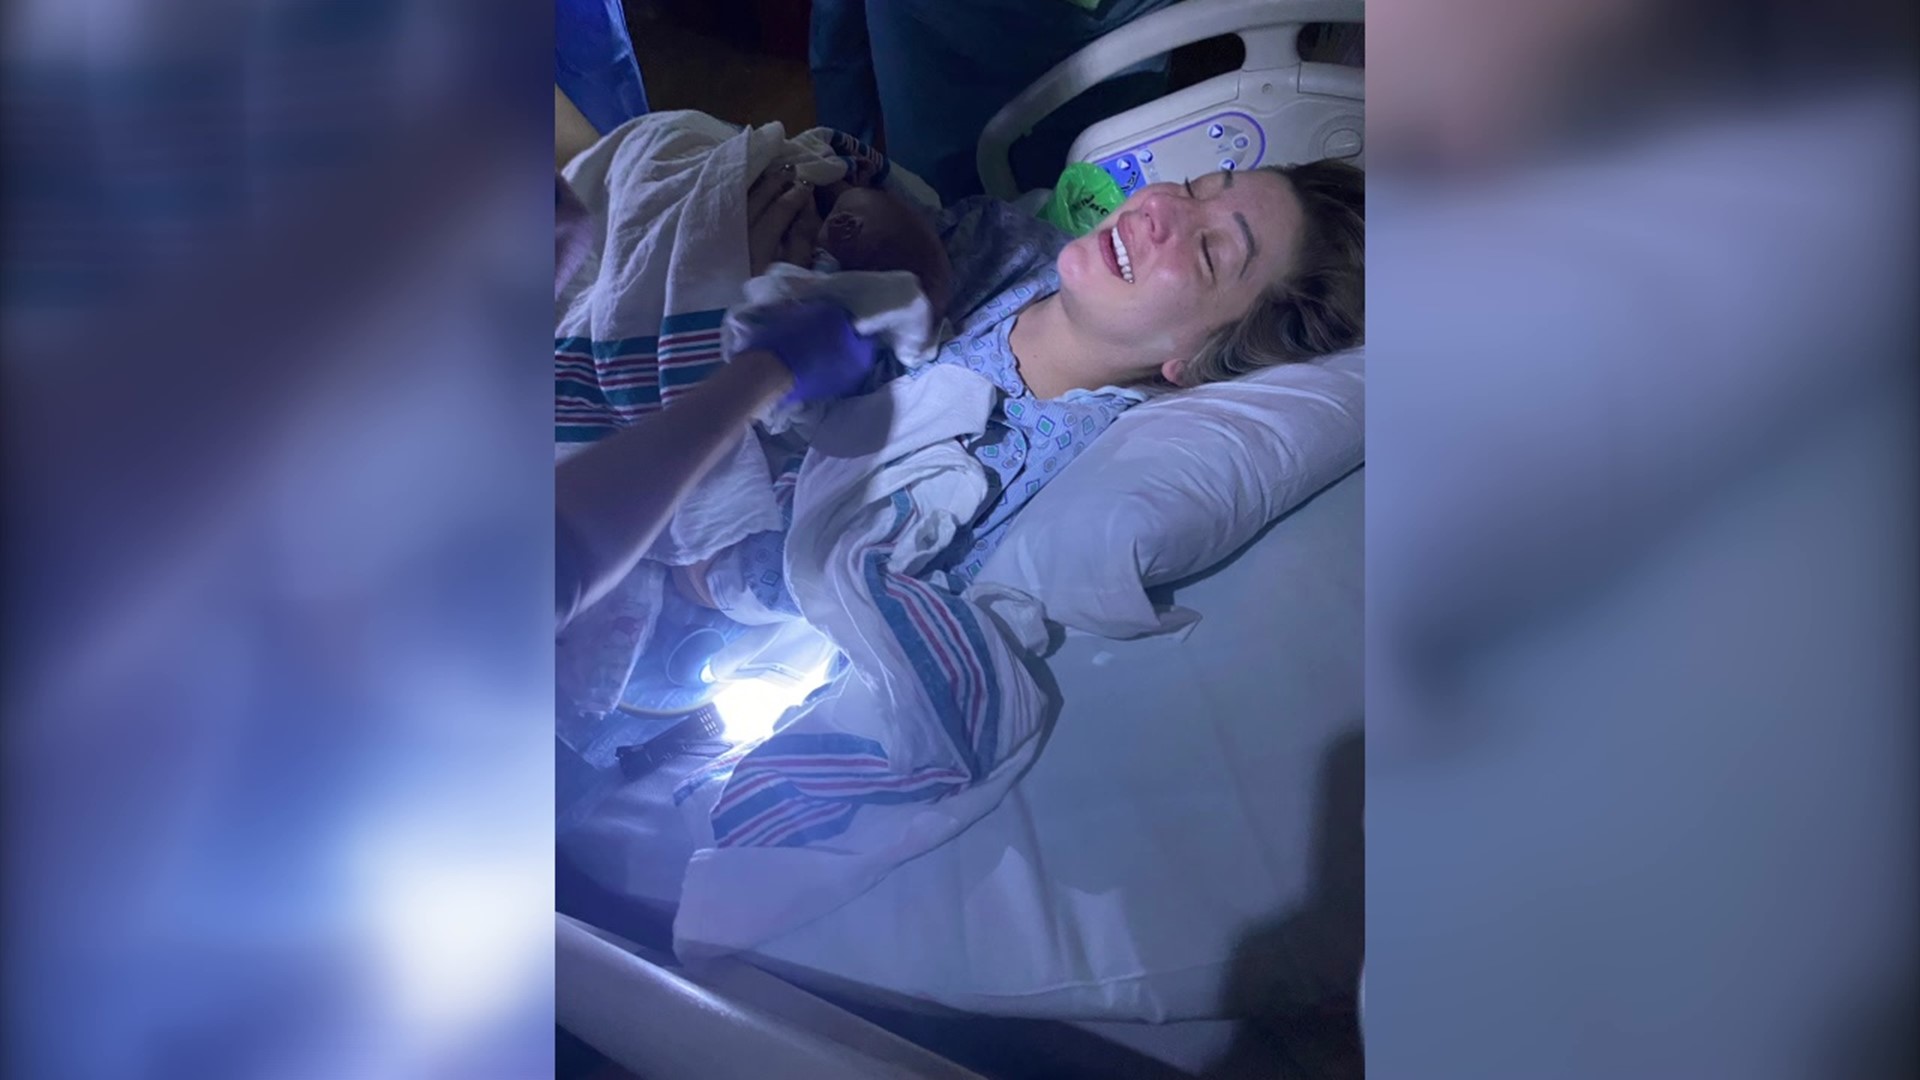 Kalyn Essick gave birth to her son while the power was out at UPMC Williamsport.